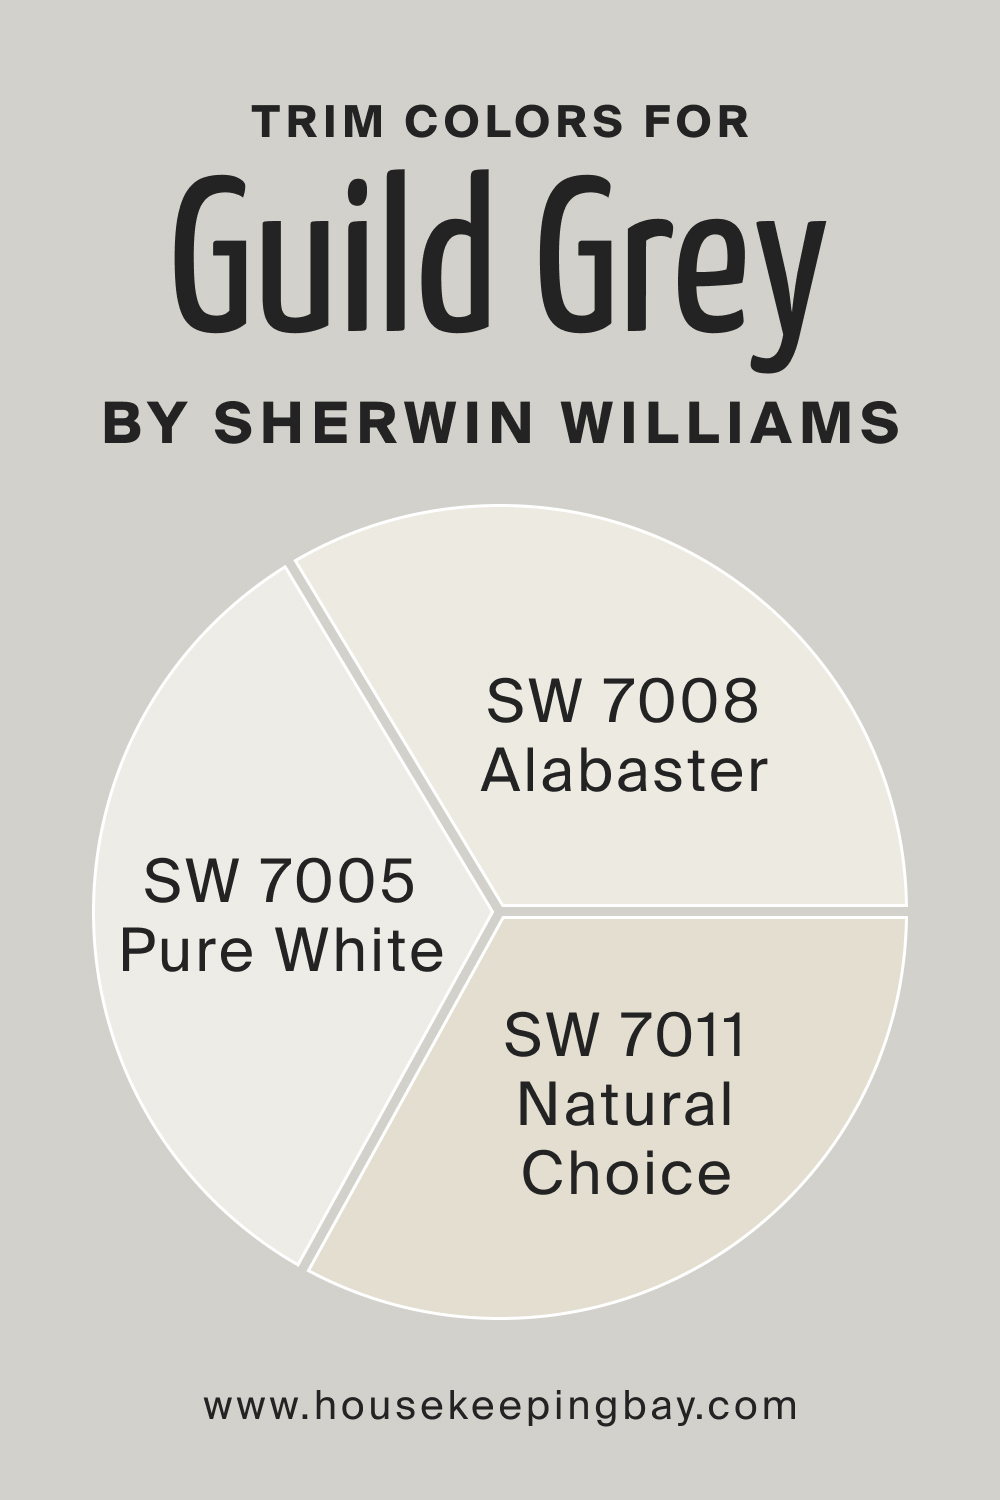 Trim Colors of SW 9561 Guild Grey by Sherwin Williams